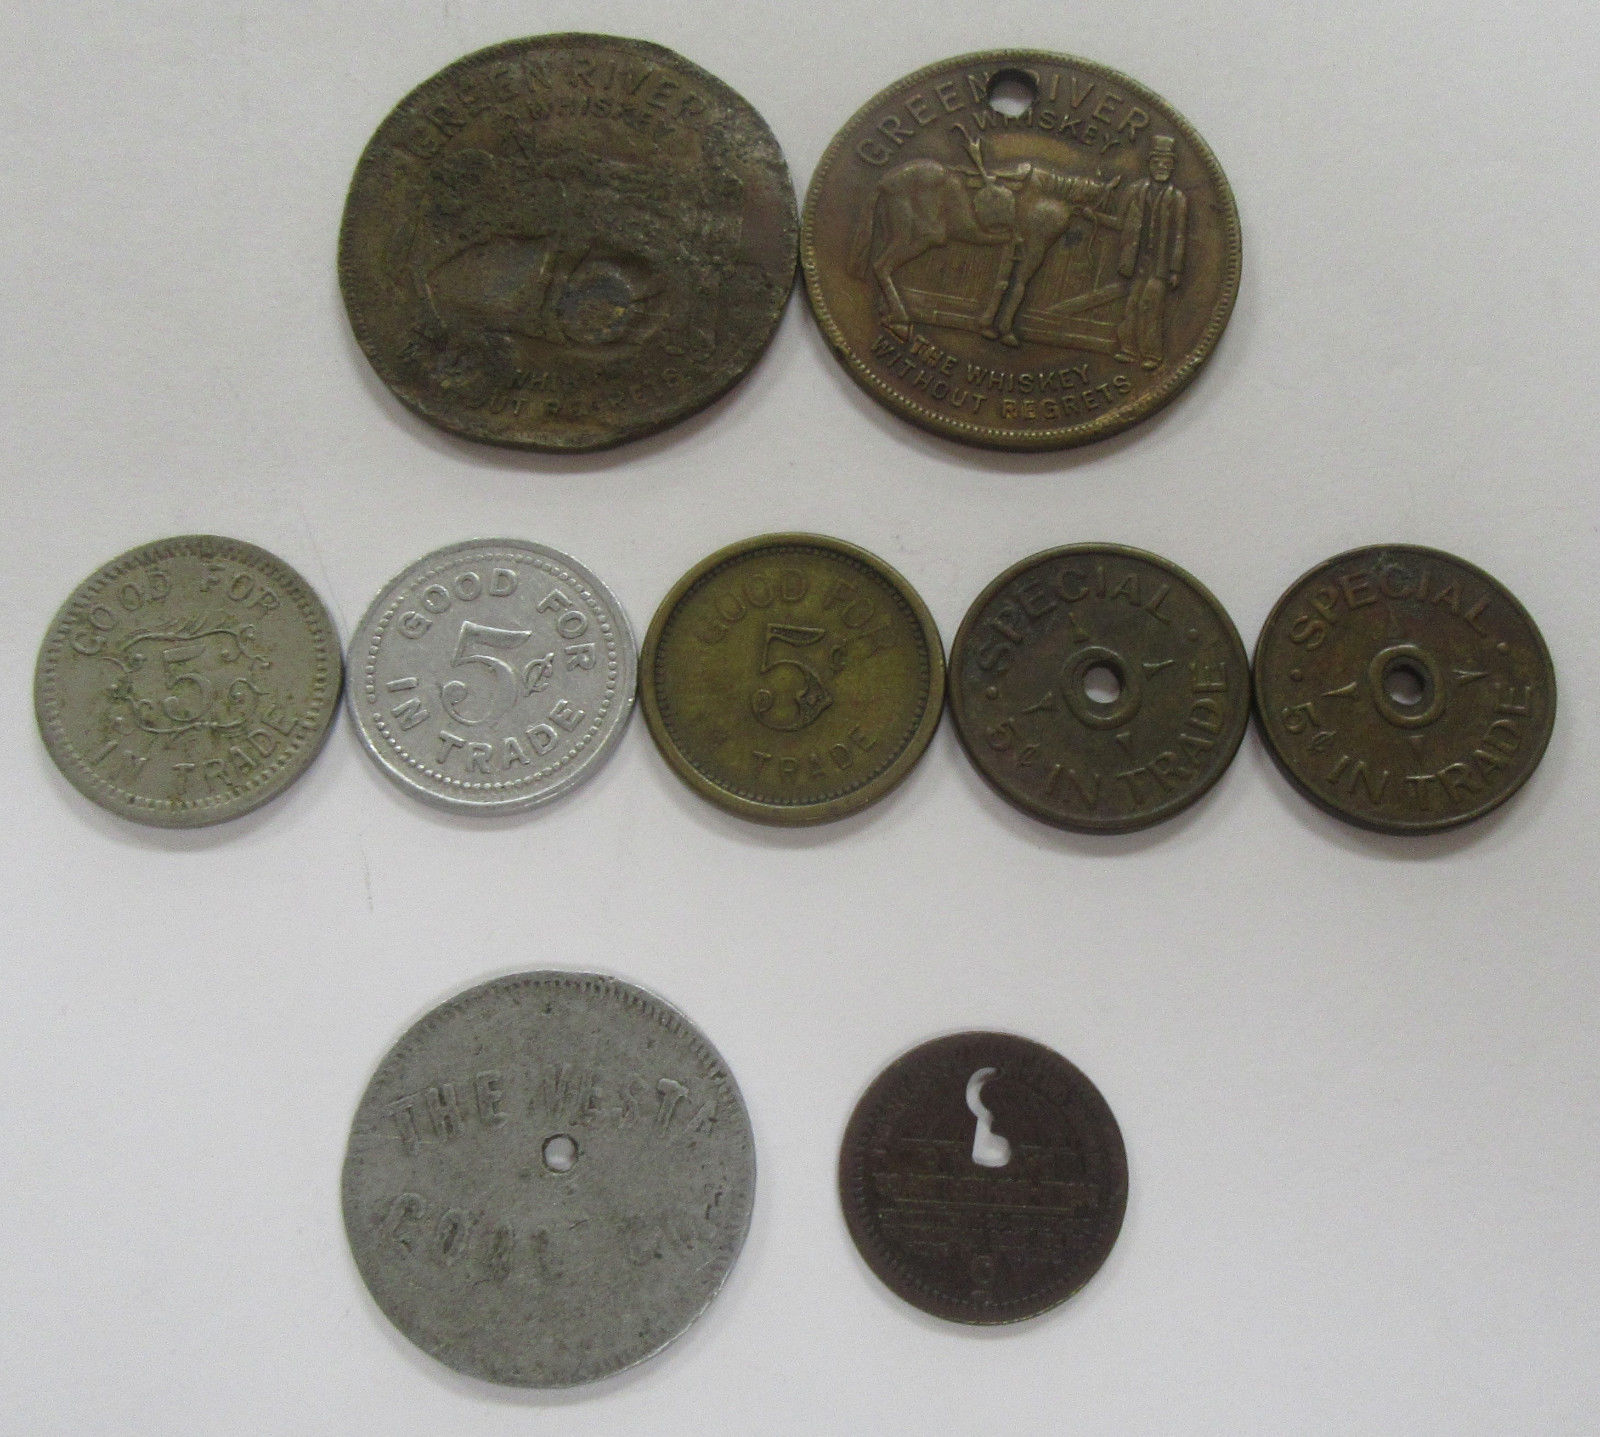 Very Unique Lot of 9 Old Trade Tokens & Highly Collectible Medals!